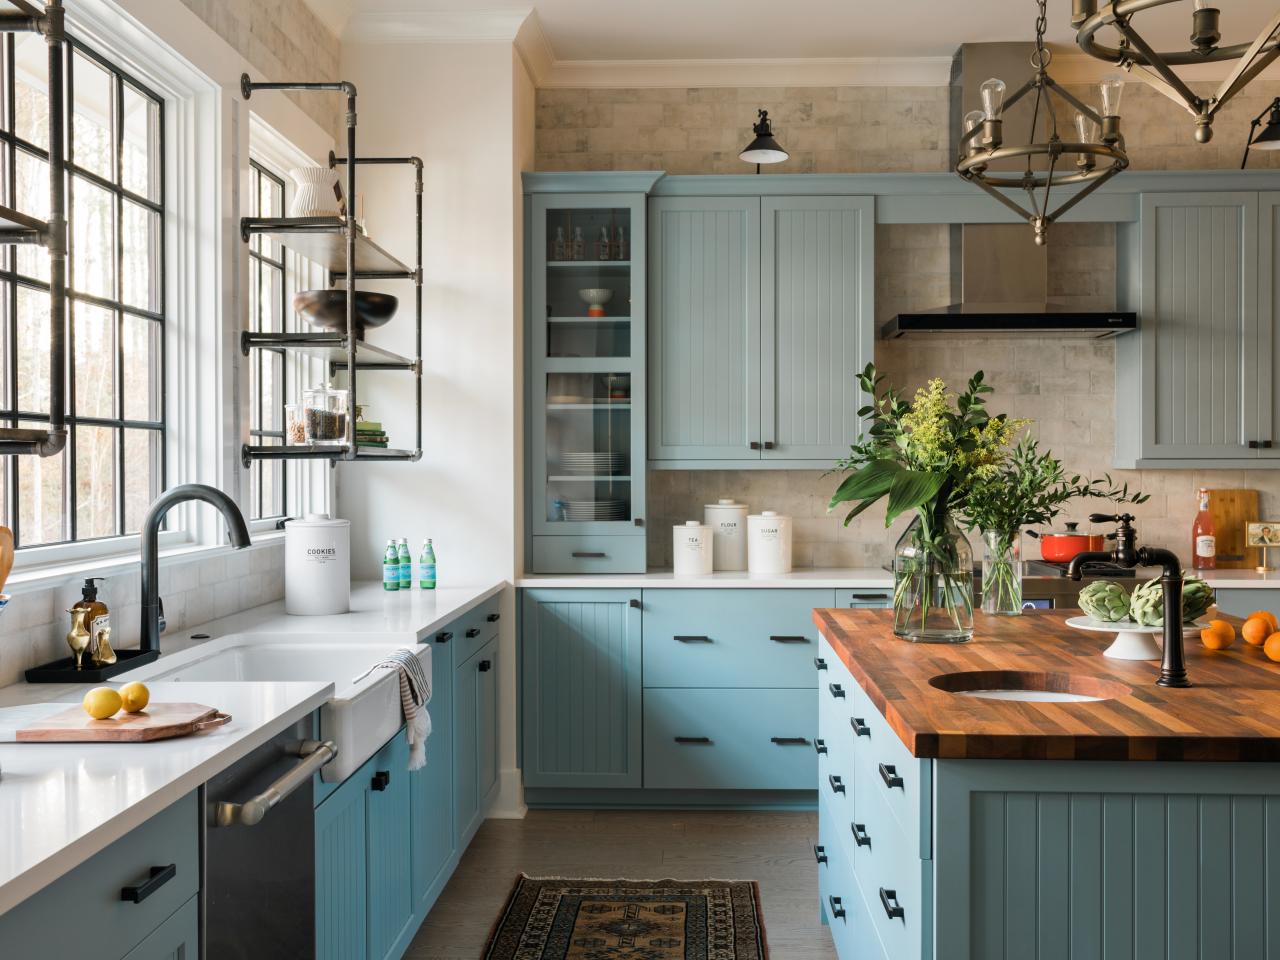 Budget-Friendly DIY Kitchen Cabinet Ideas - The Turquoise Home